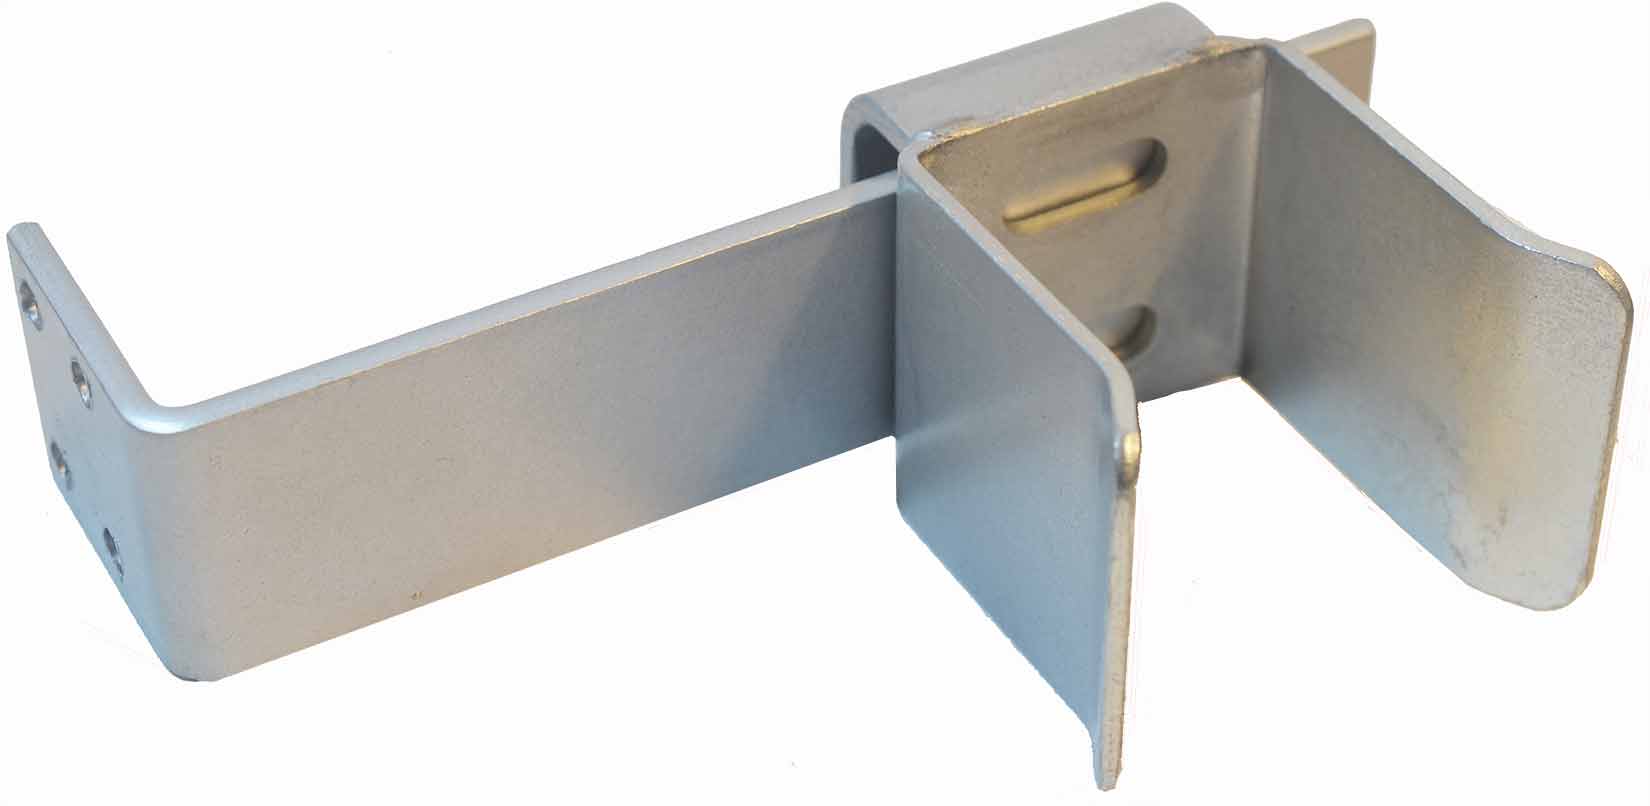 Gate Reciever holder adjustable front view